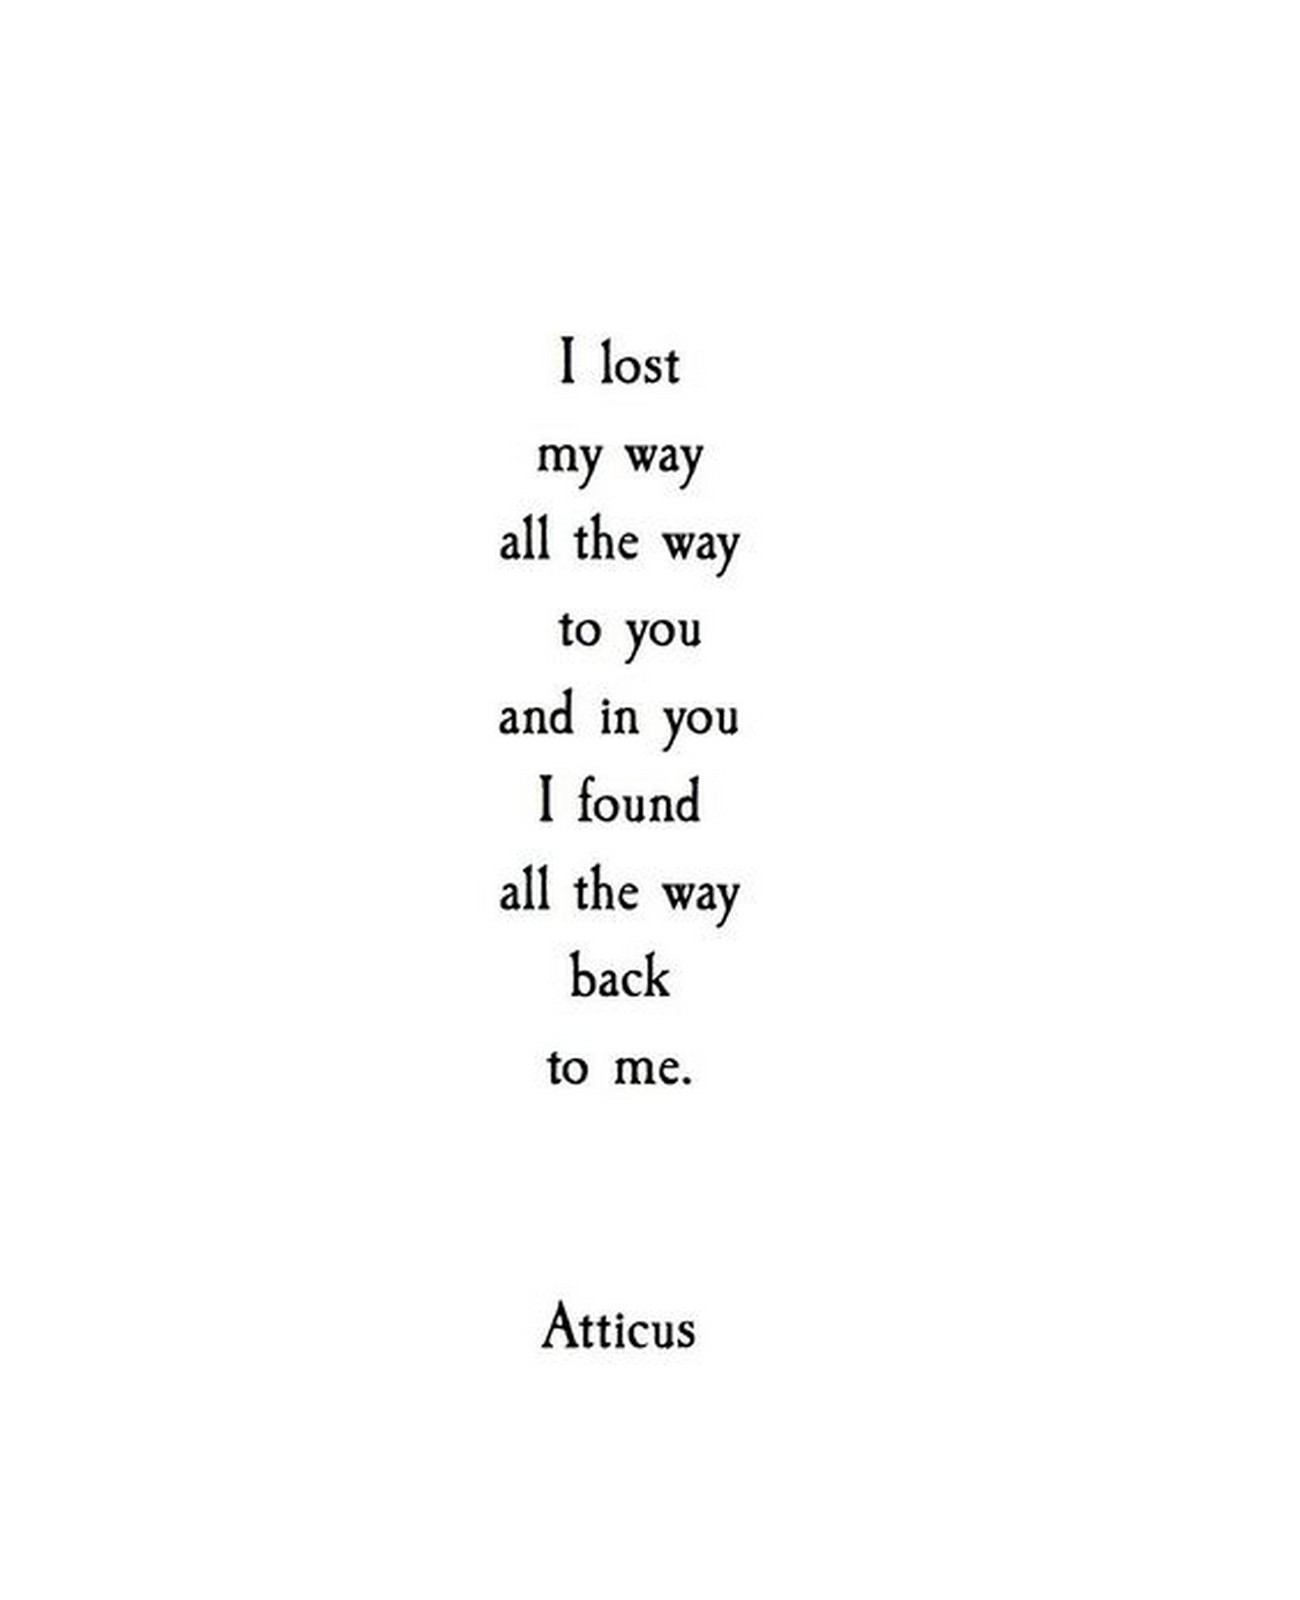 55 Romantic Quotes - "I lost my way all the way to you and in you I found all the way back to me." - Atticus